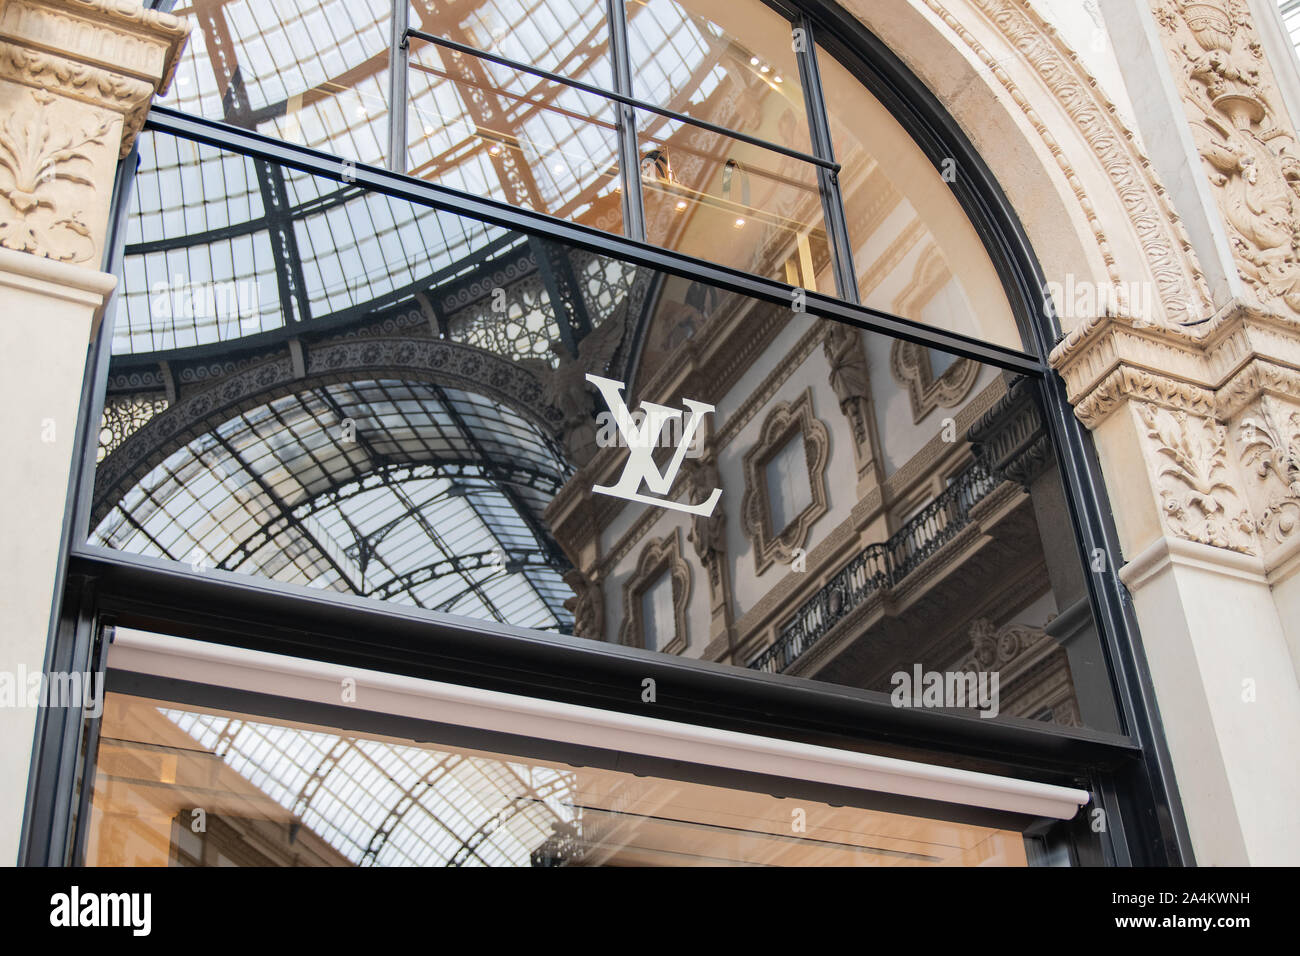 Shop Windows Of A Louis Vuitton Shop In Milan - Montenapoleone Area, Italy.  Stock Photo, Picture and Royalty Free Image. Image 104406833.